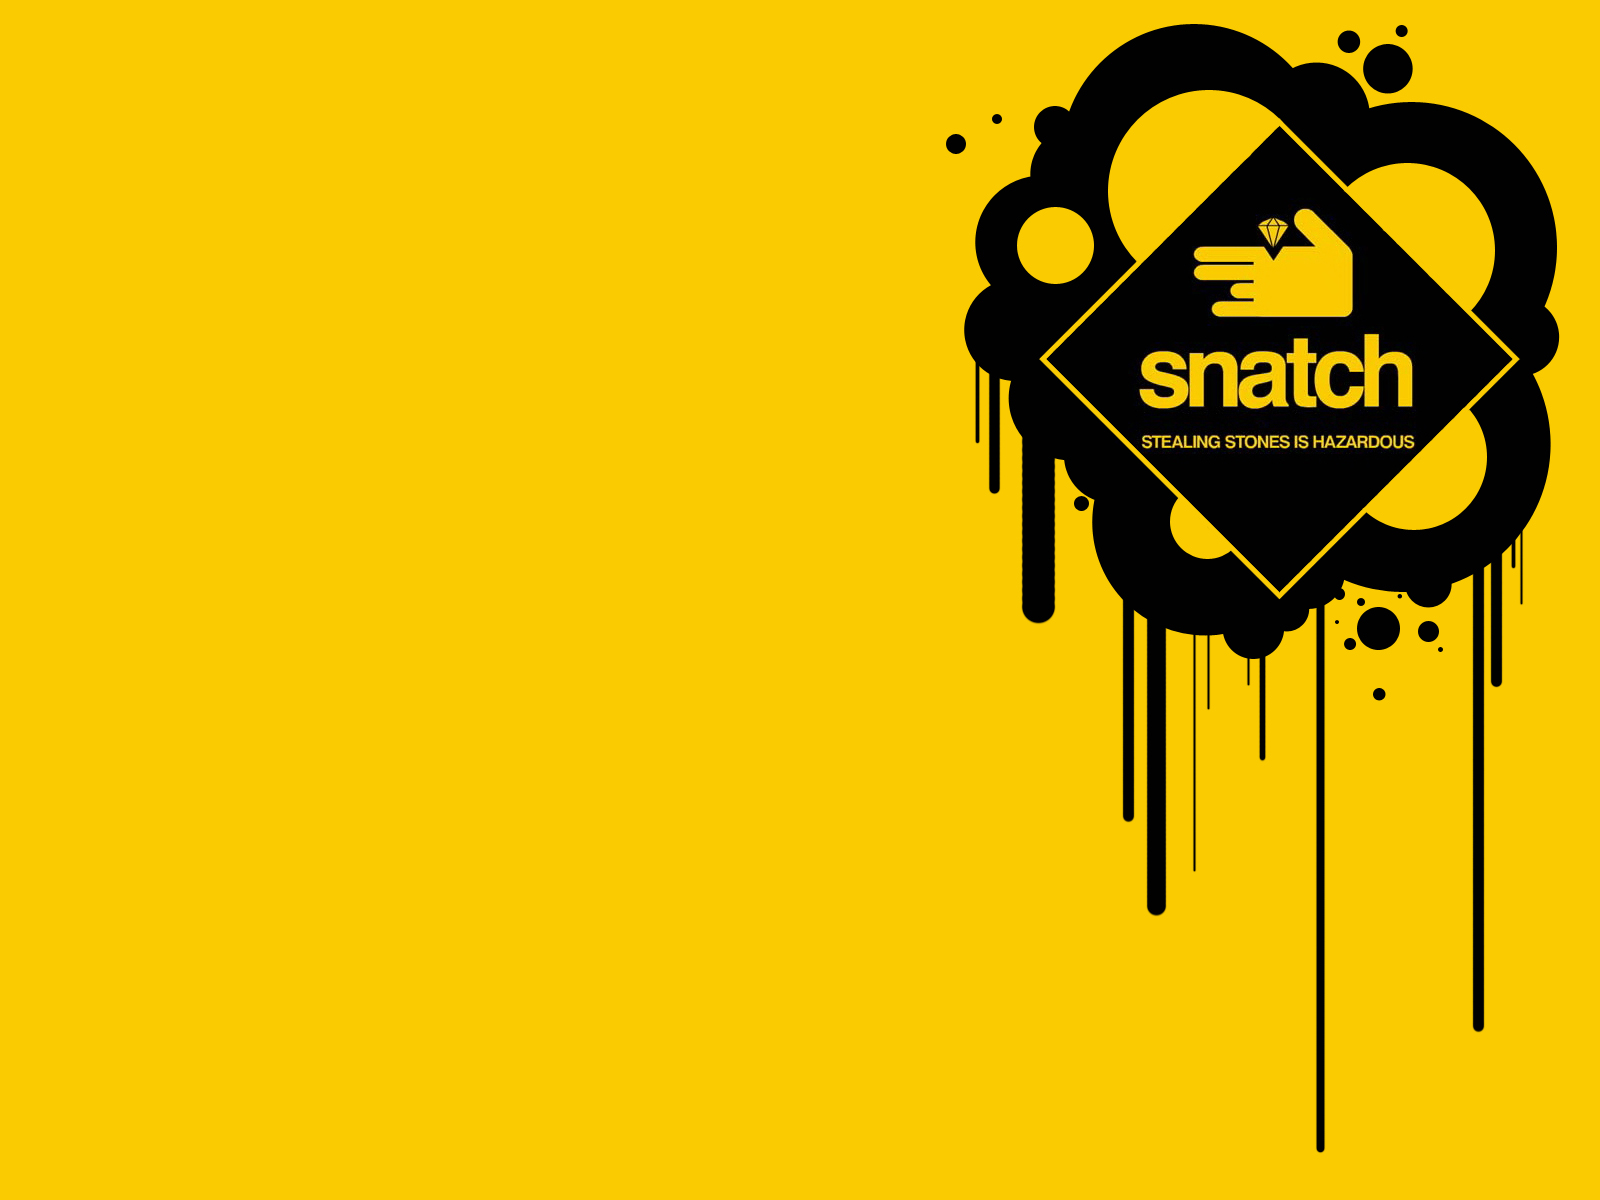 6 Snatch HD Wallpapers Backgrounds - Wallpaper Abyss